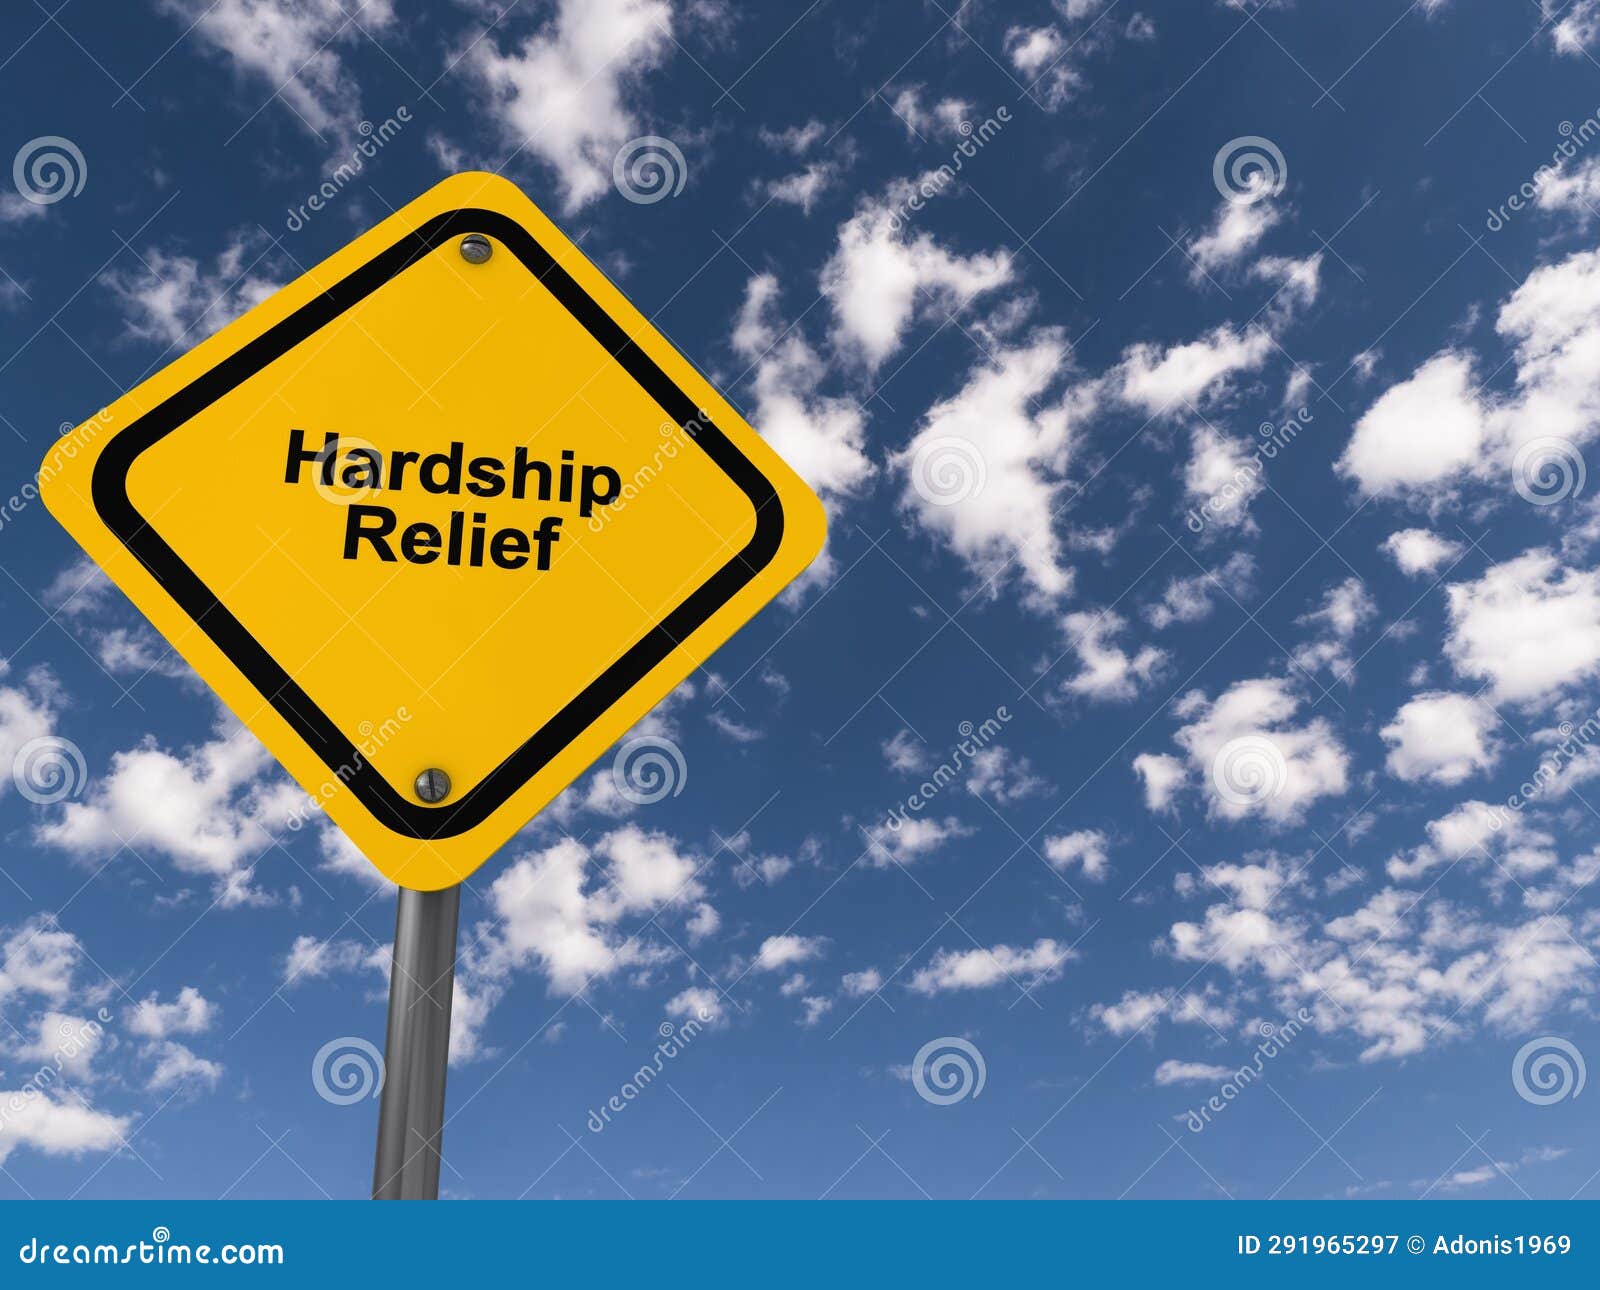 hardship relief traffic sign on blue sky